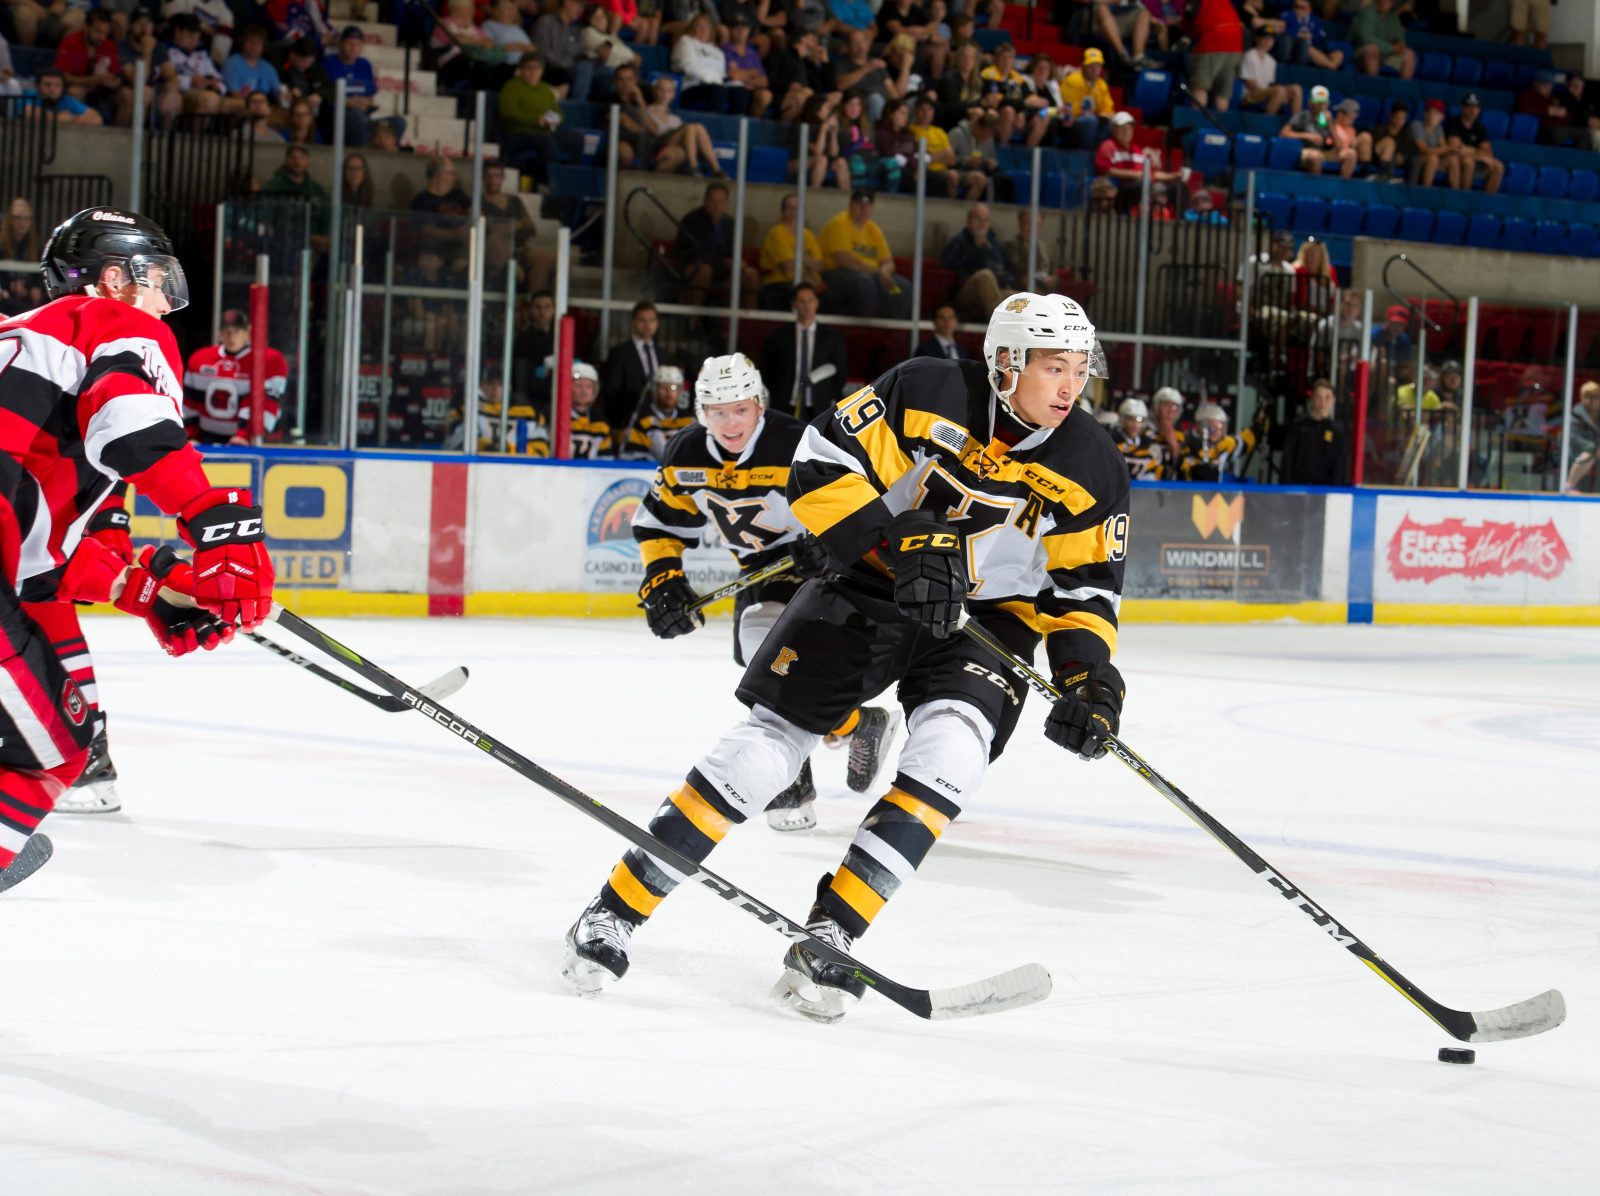 OHL returns to Civic Complex for exhibition game